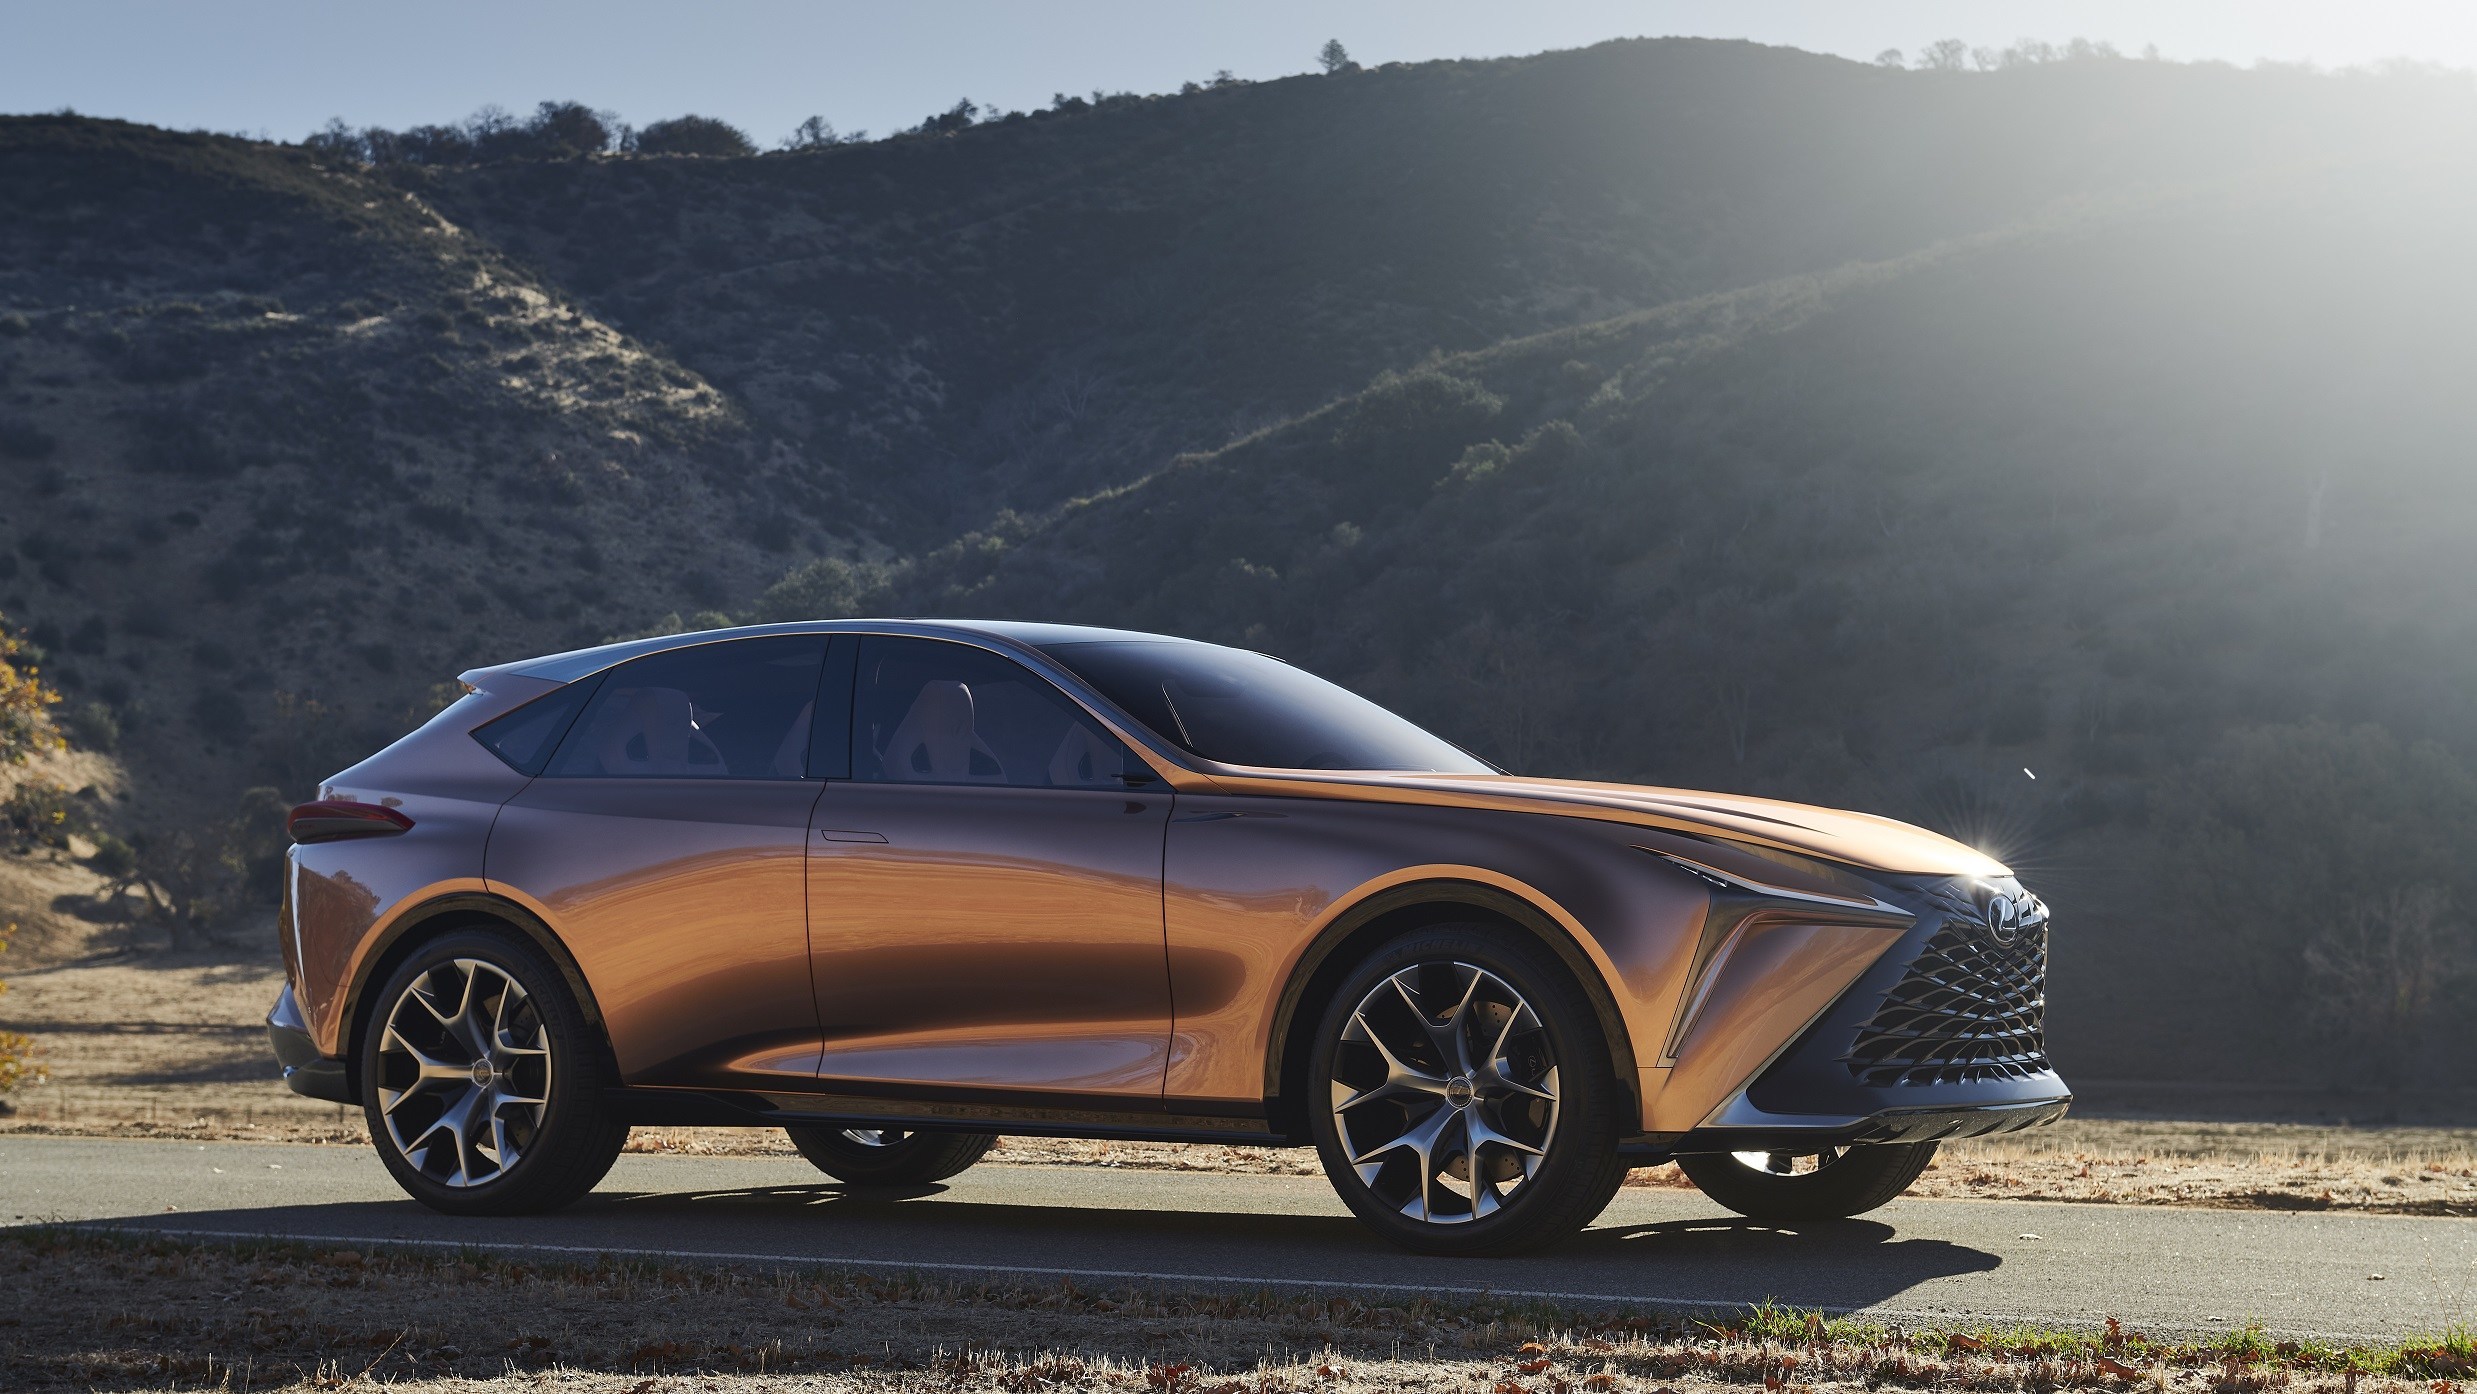 Lexus Carves Out a New Flagship Luxury Crossover with Lexus LF-1 Limitless Concept